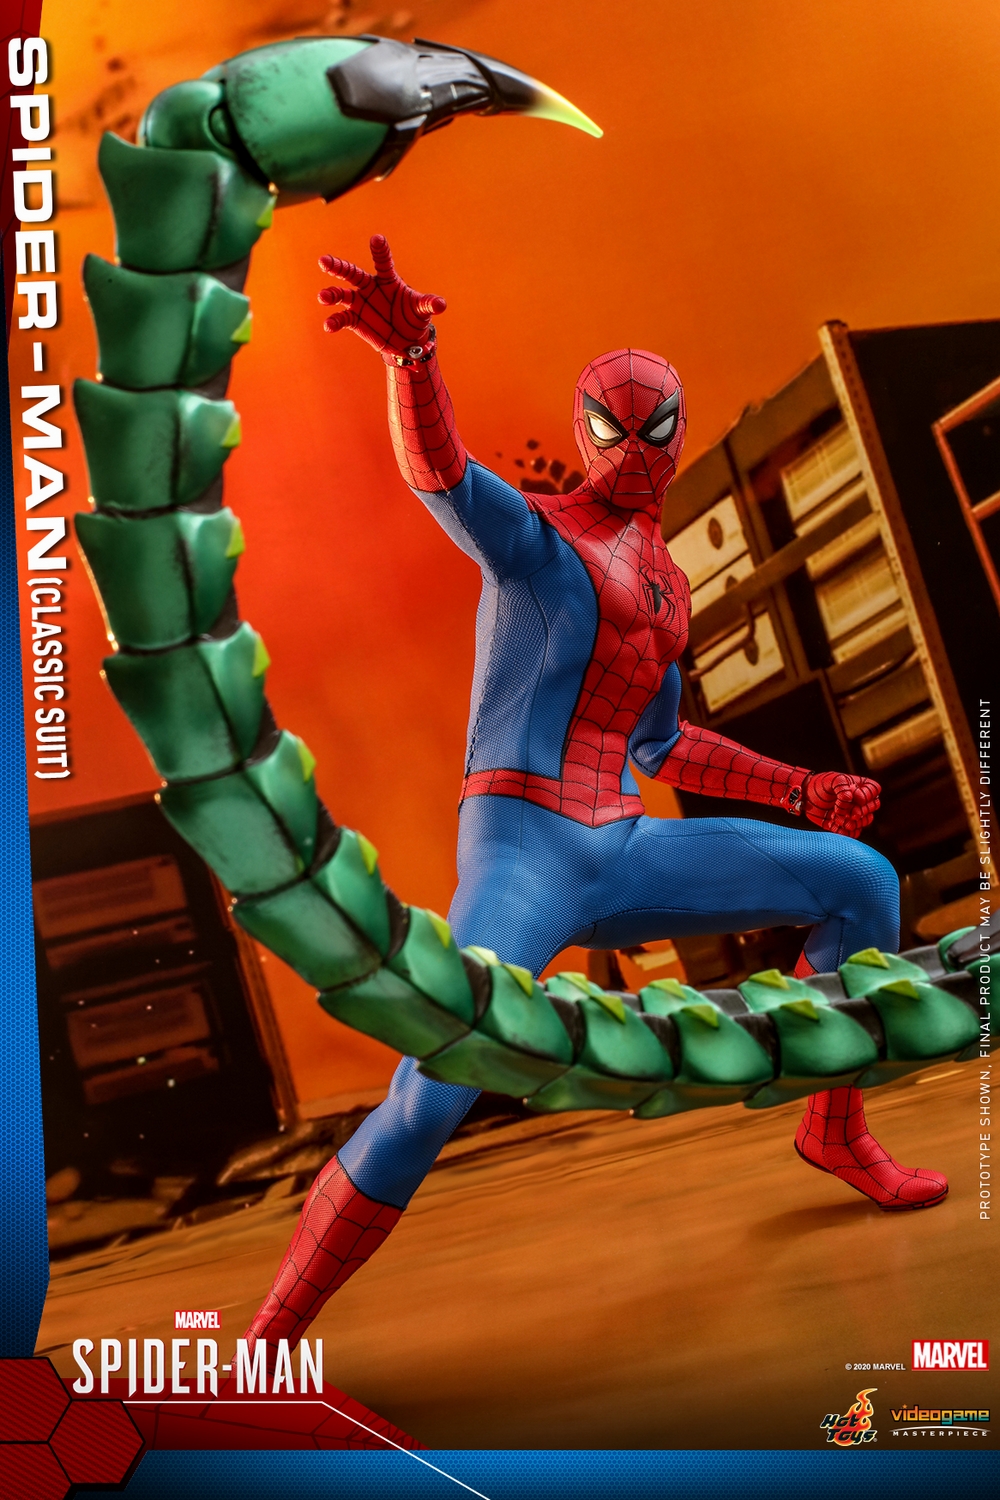 Hot Toys - MSM - Spider-Man (Classic Suit) collectible figure_PR03.jpg